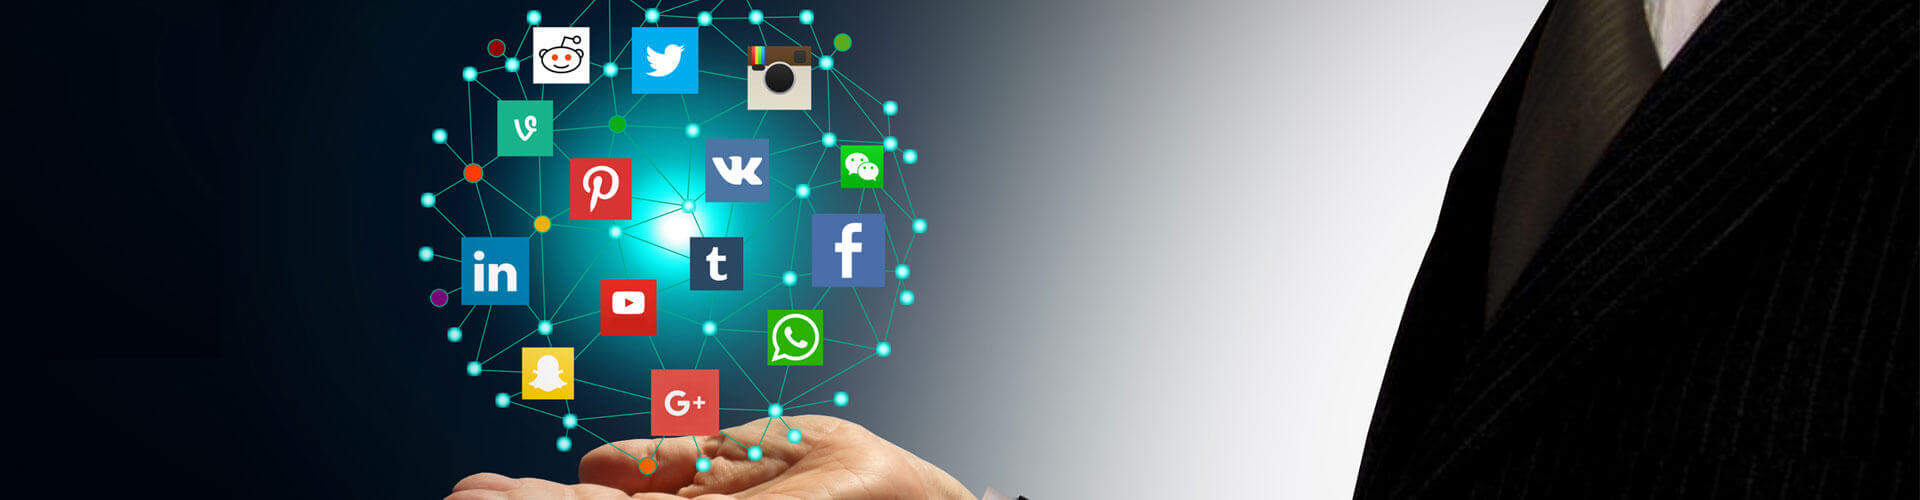 Social Media Marketing and Business